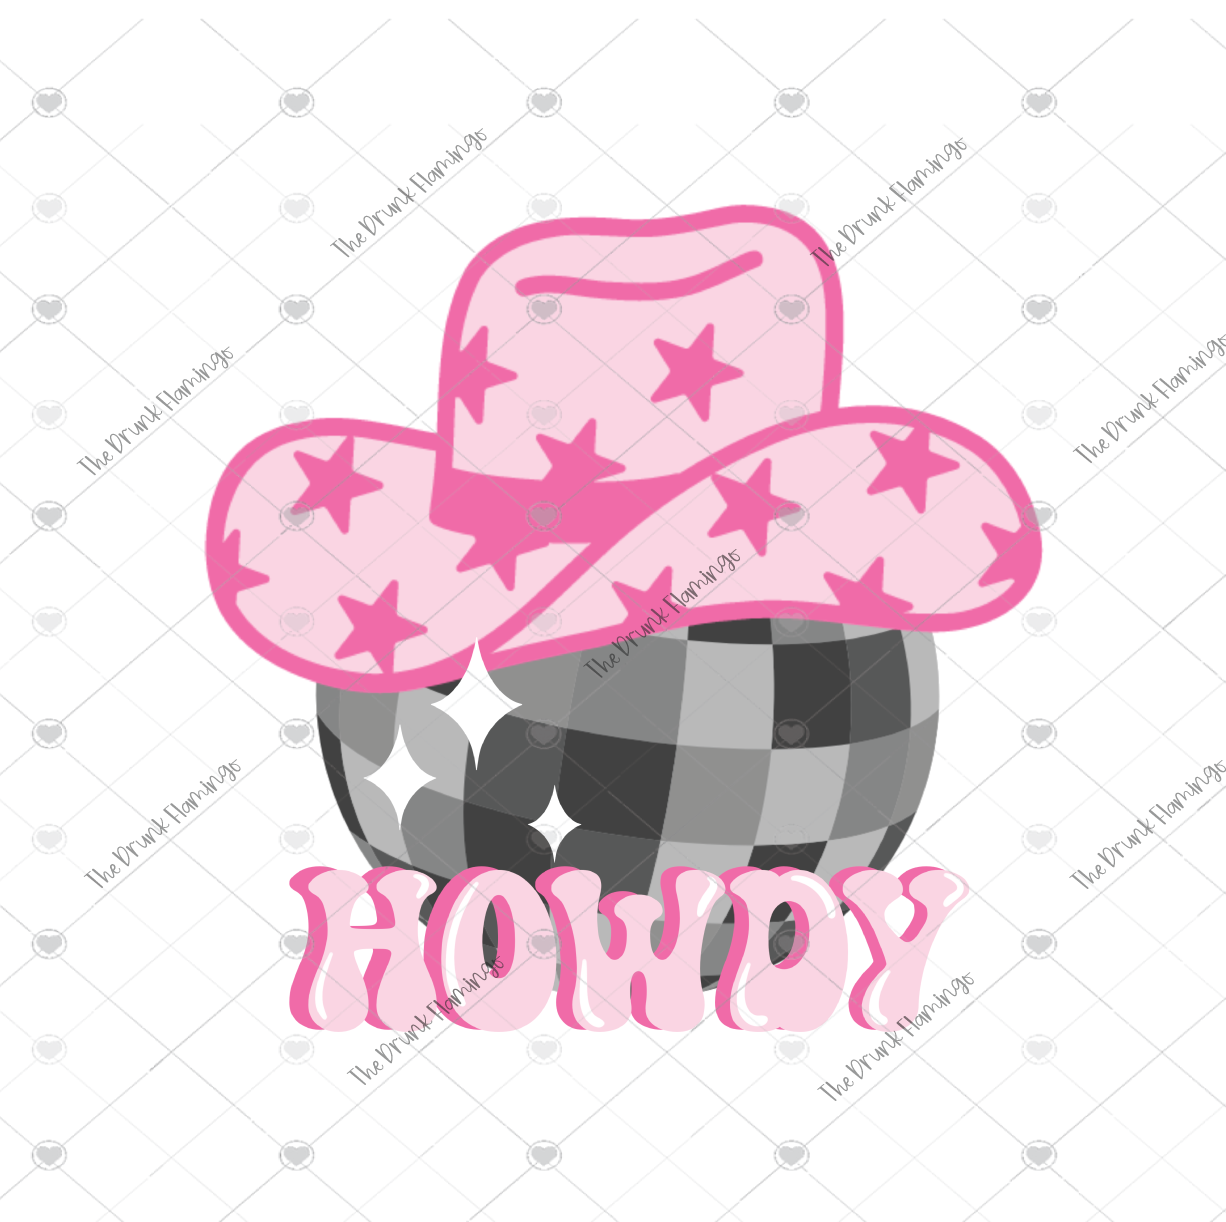 67- Howdy Disco Ball WHITE backed decal